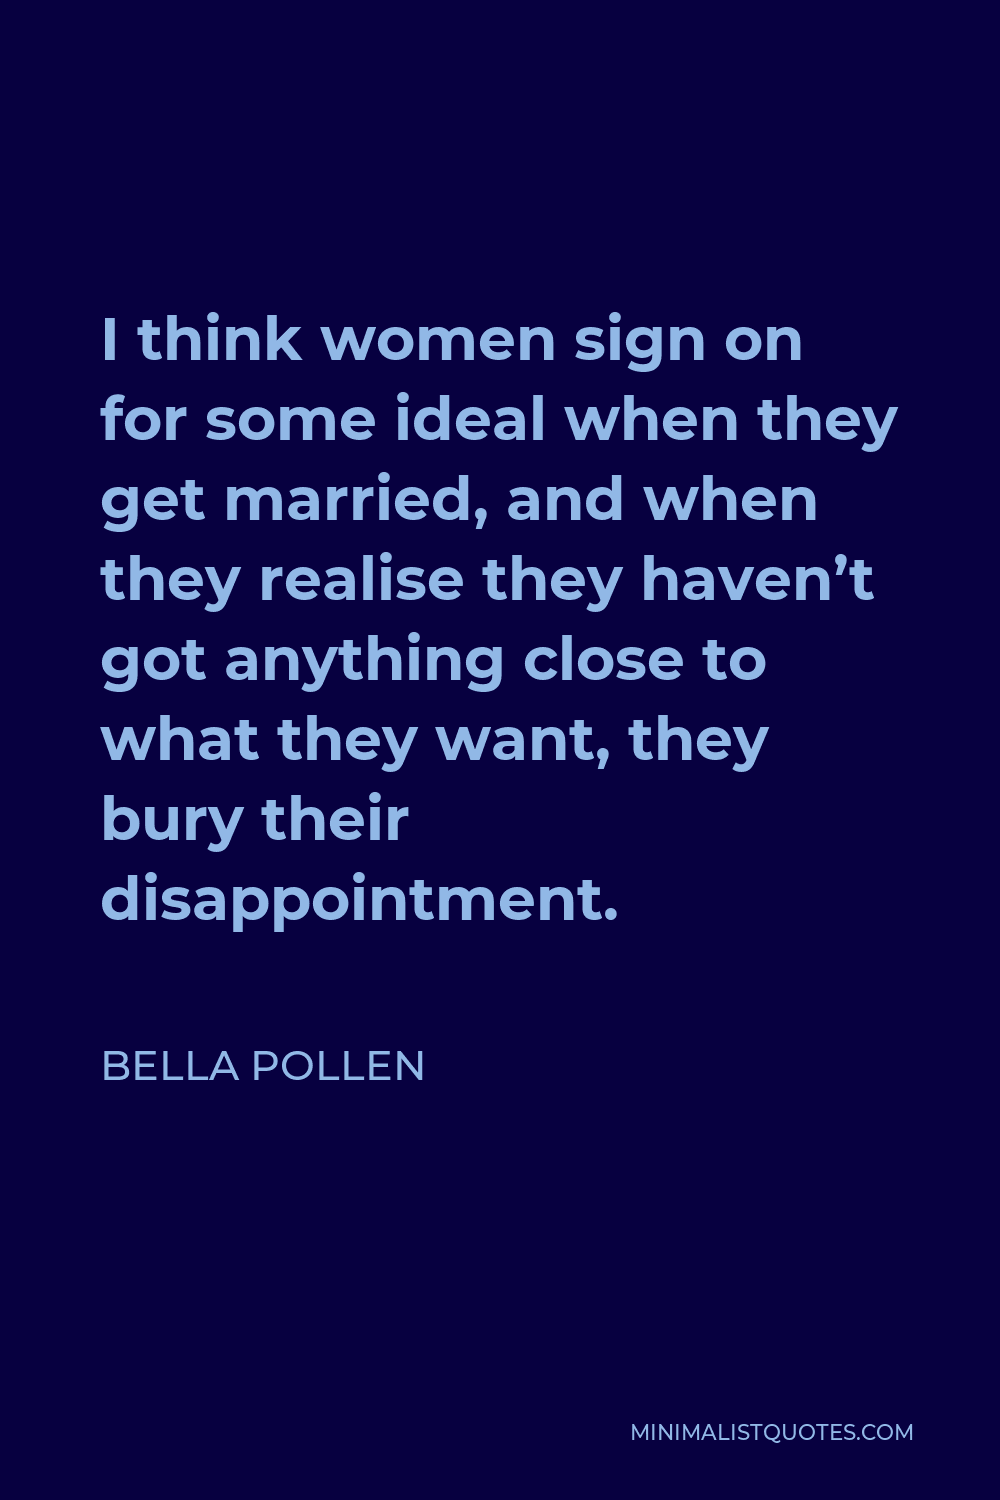 Bella Pollen Quote - I think women sign on for some ideal when they get married, and when they realise they haven’t got anything close to what they want, they bury their disappointment.